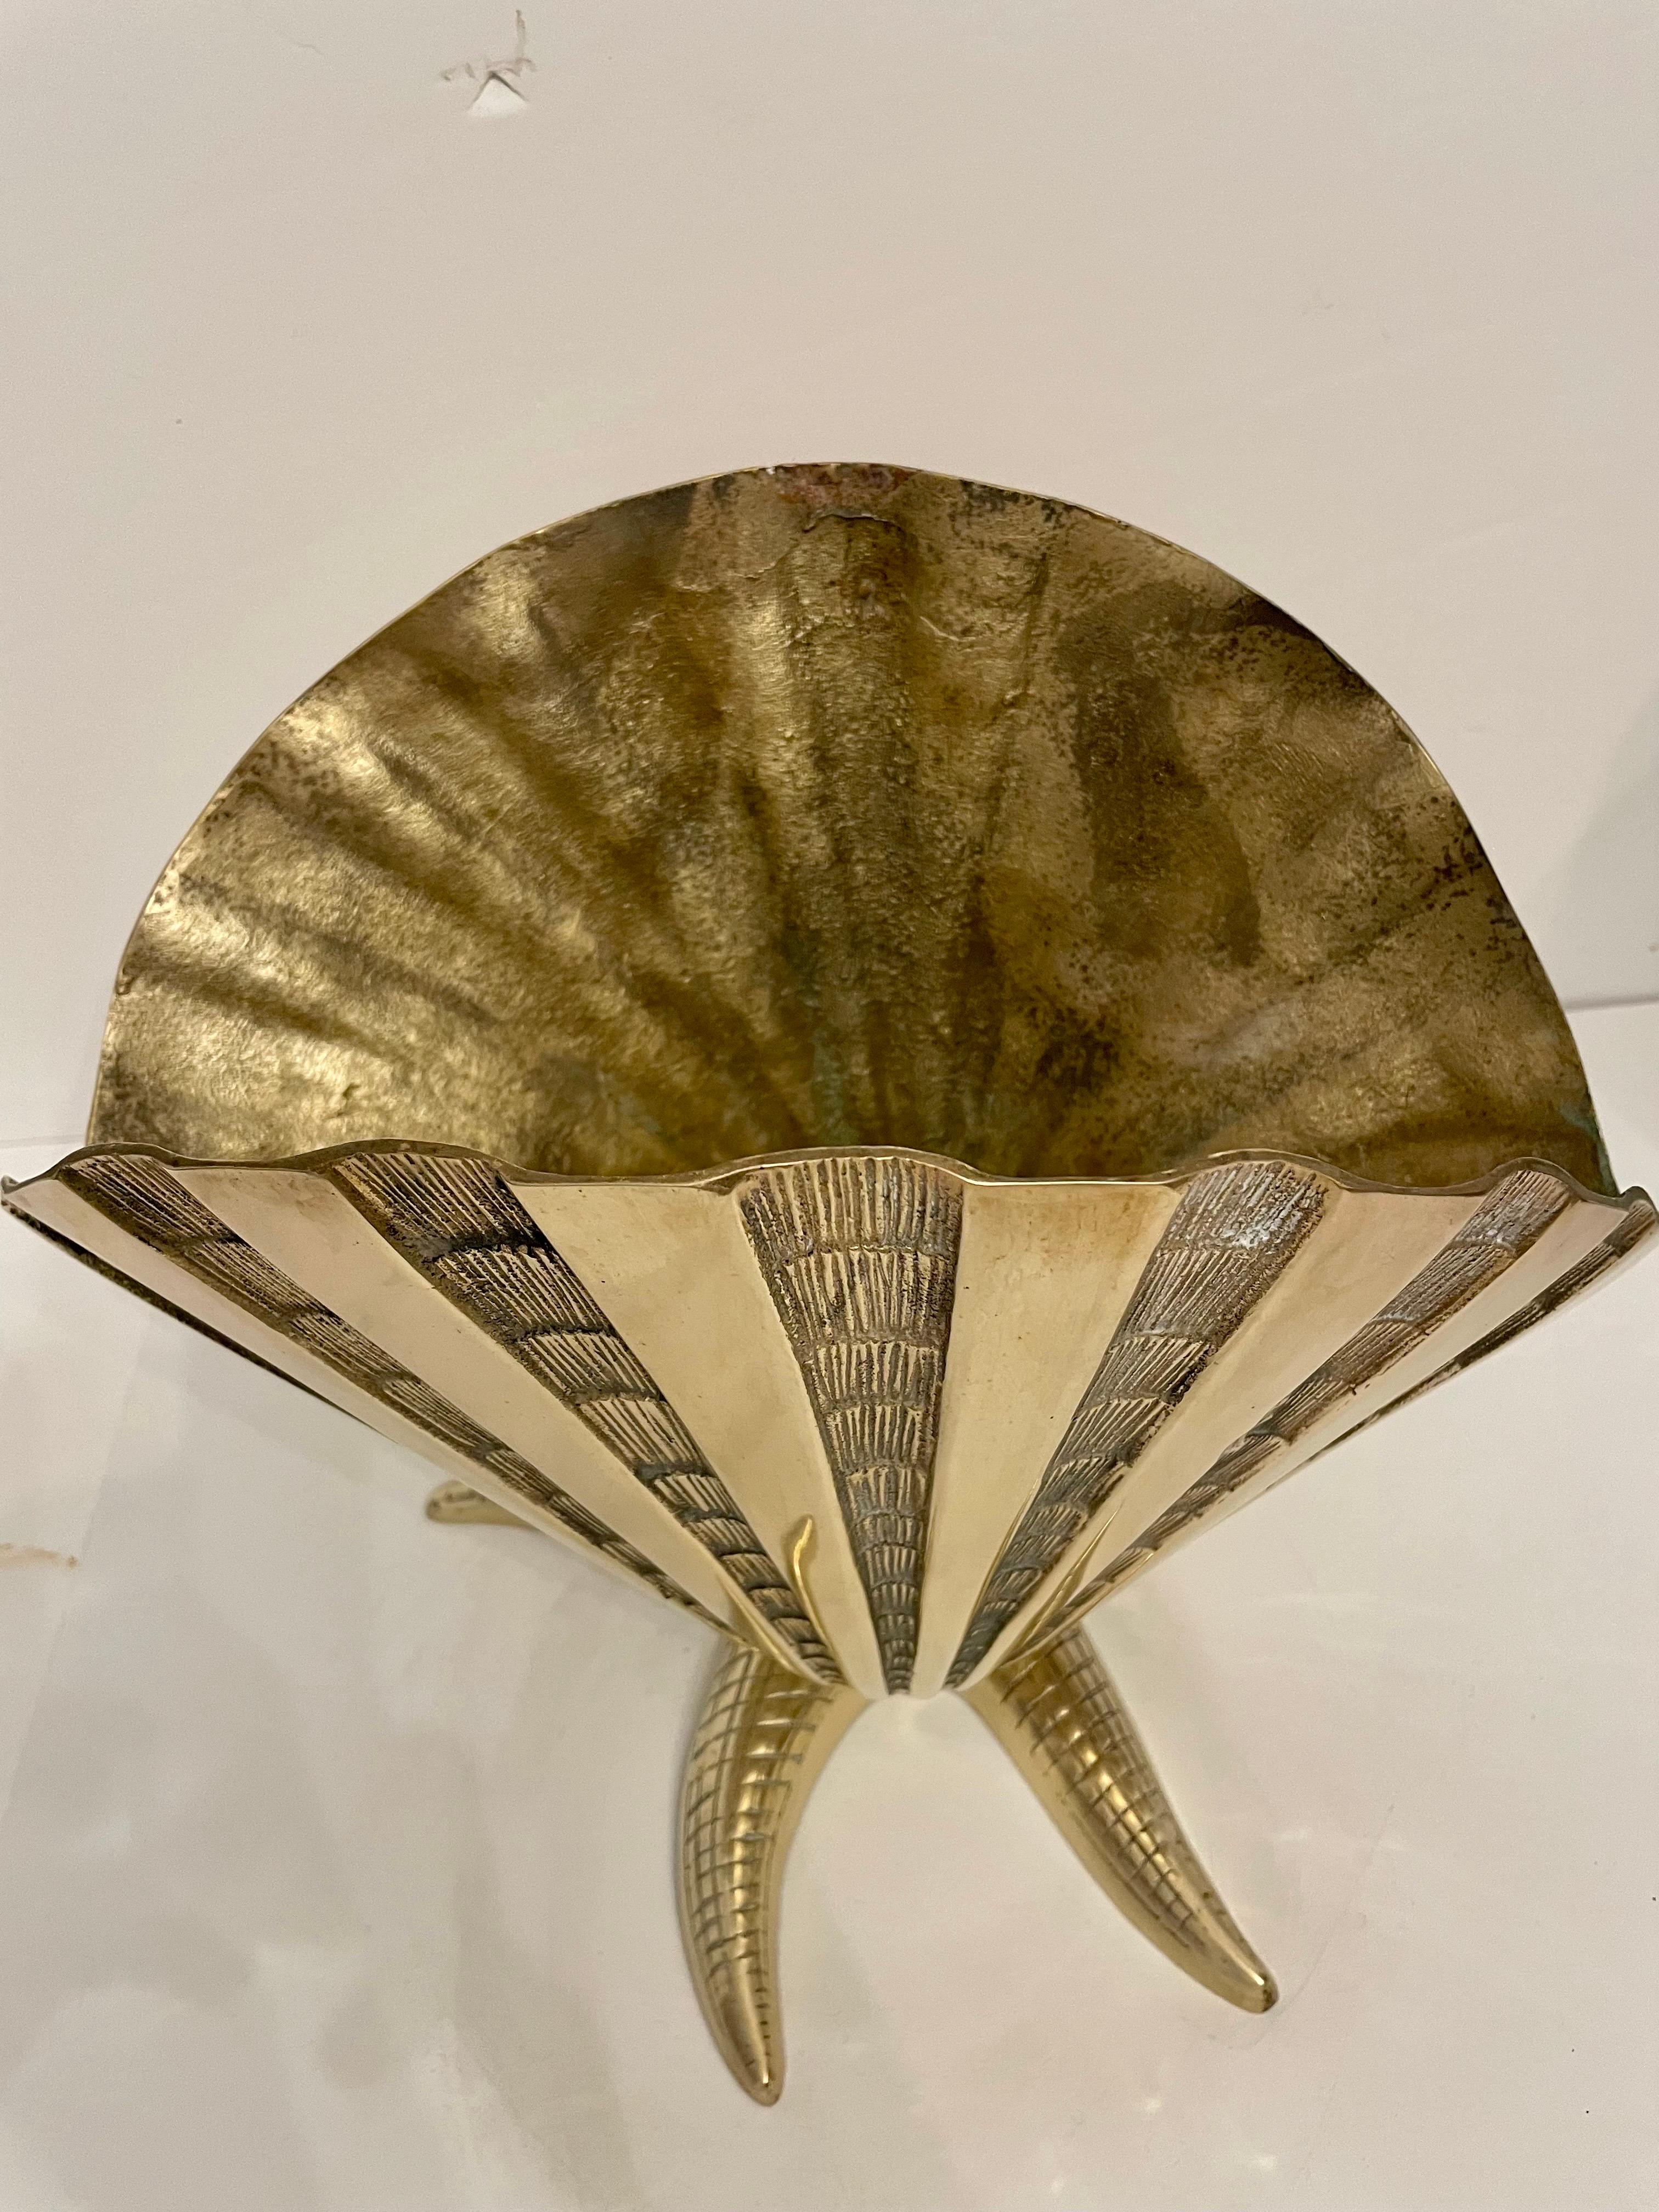 Cast Extra Large Brass Sea Shell on Star Fish Base